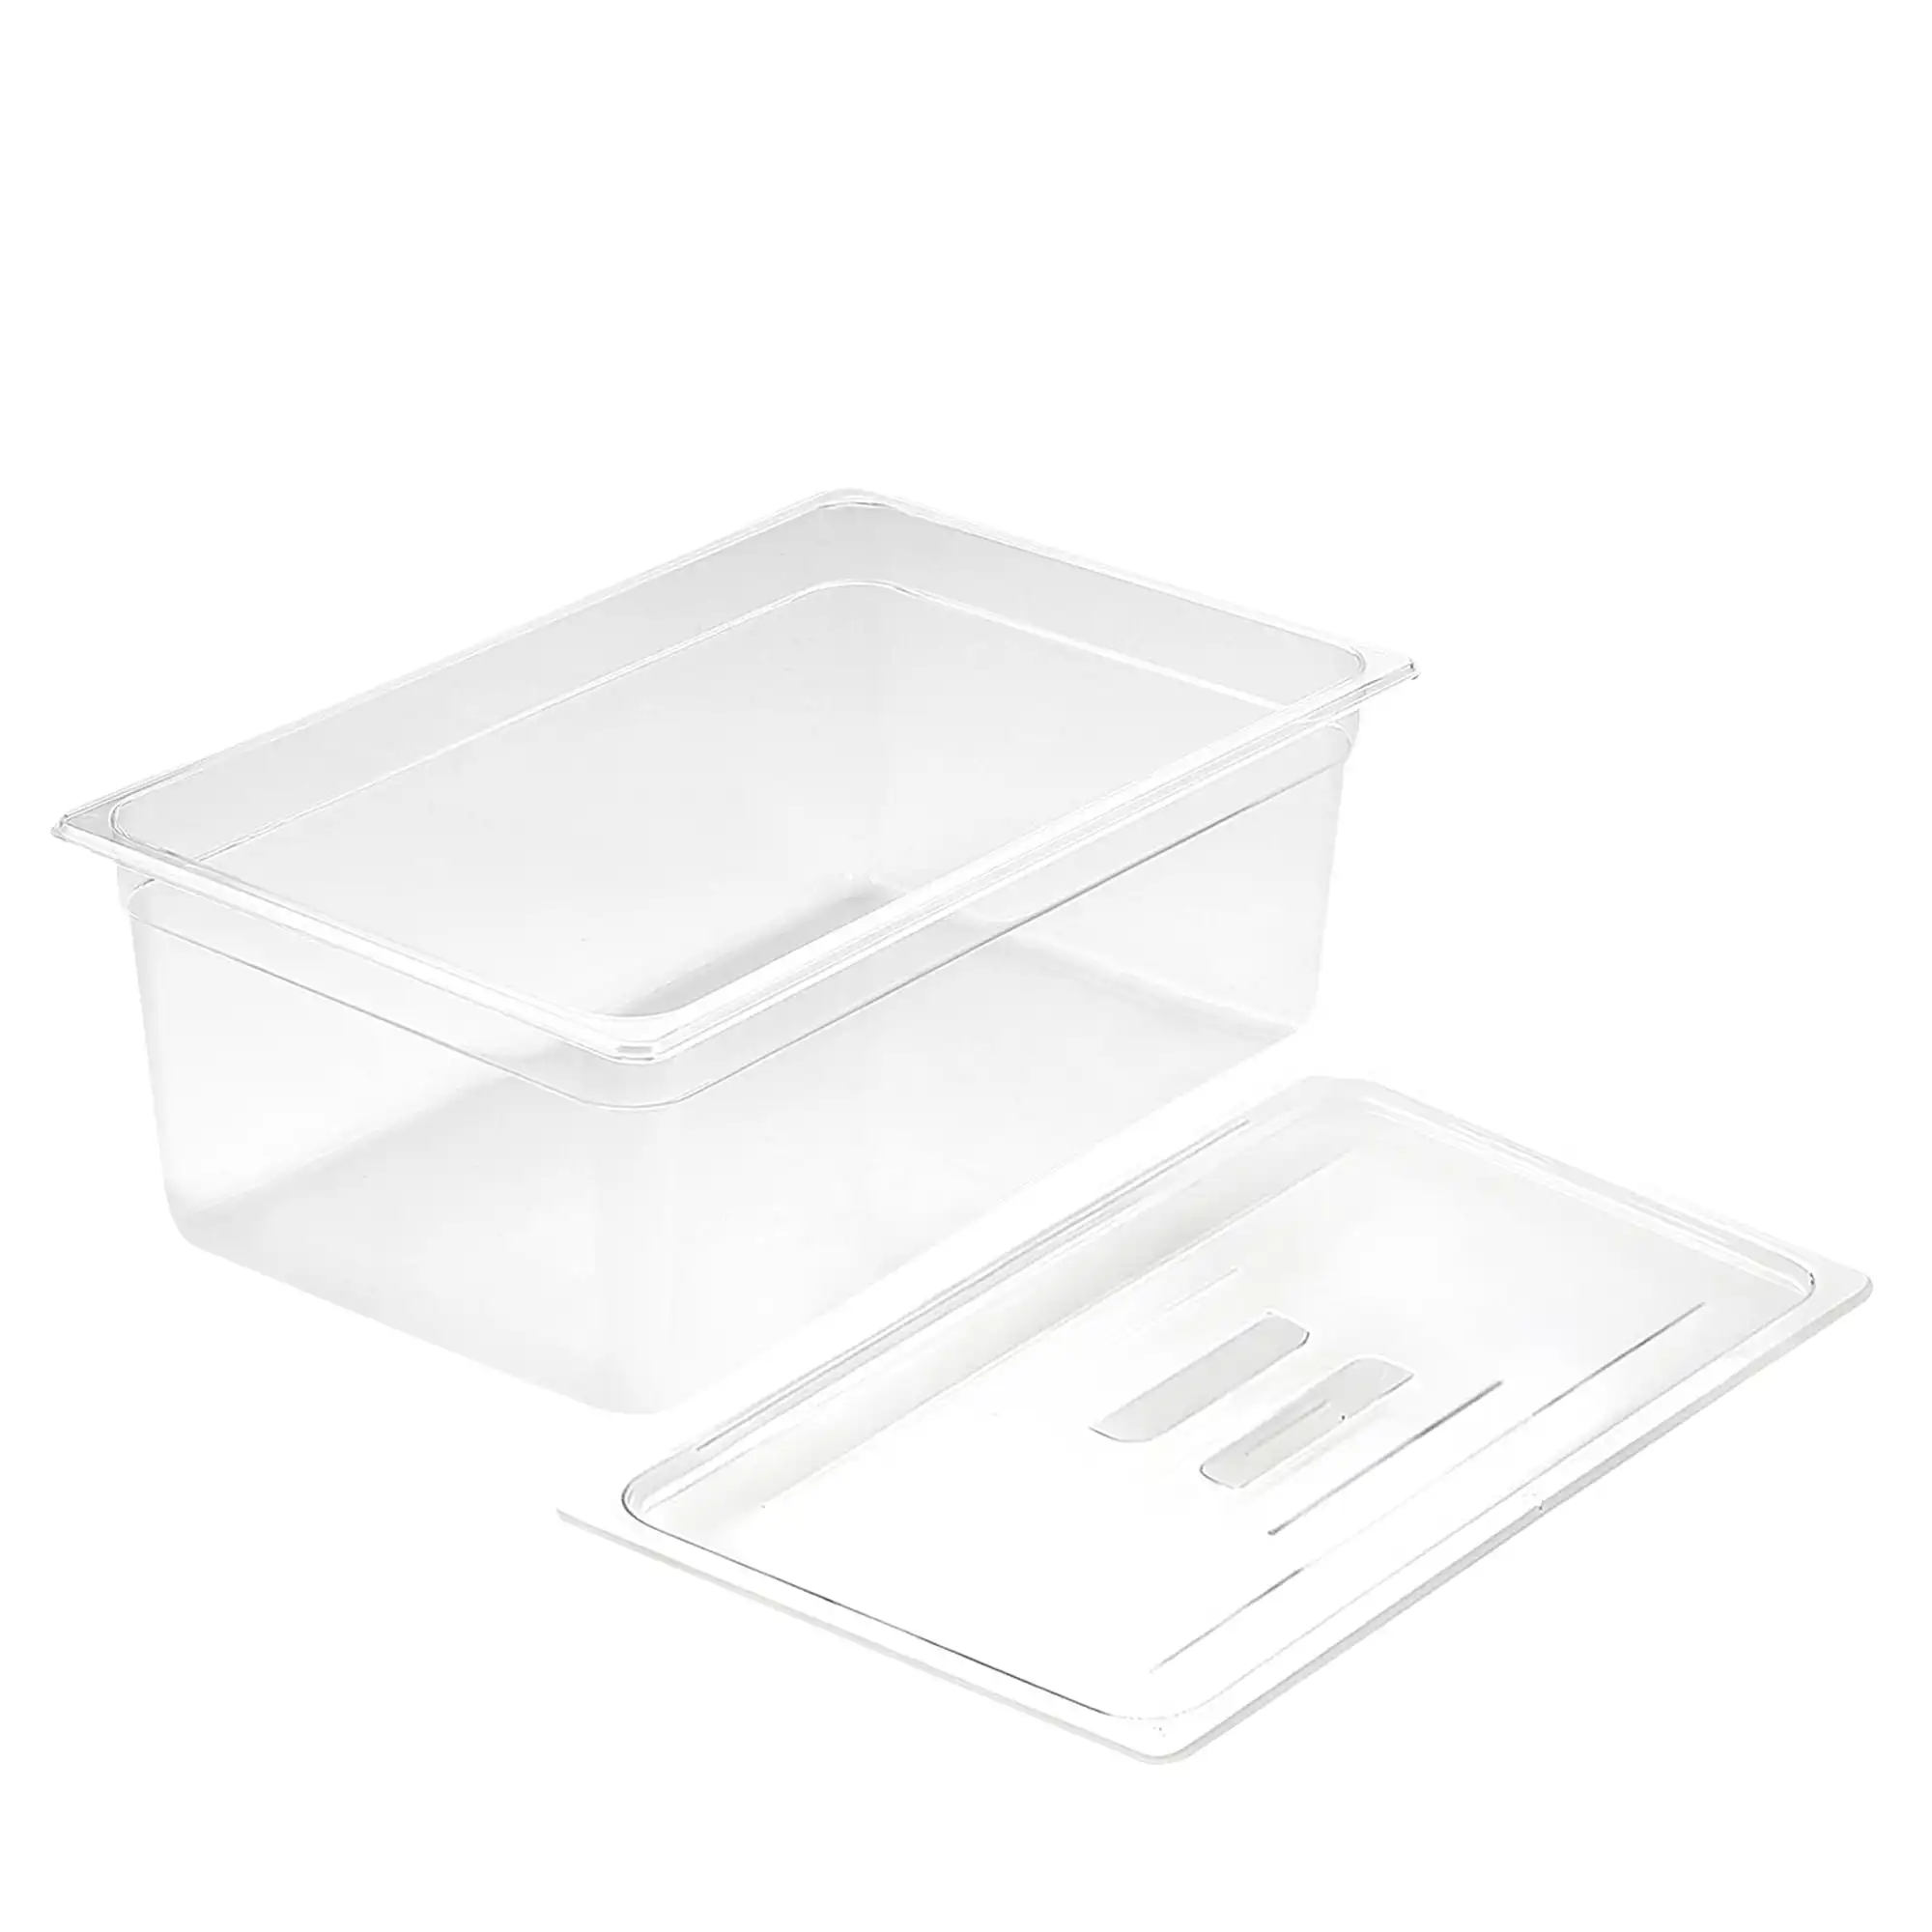 Soga 200mm Clear Gastronorm GN Pan 1/1 Food Tray Storage with Lid